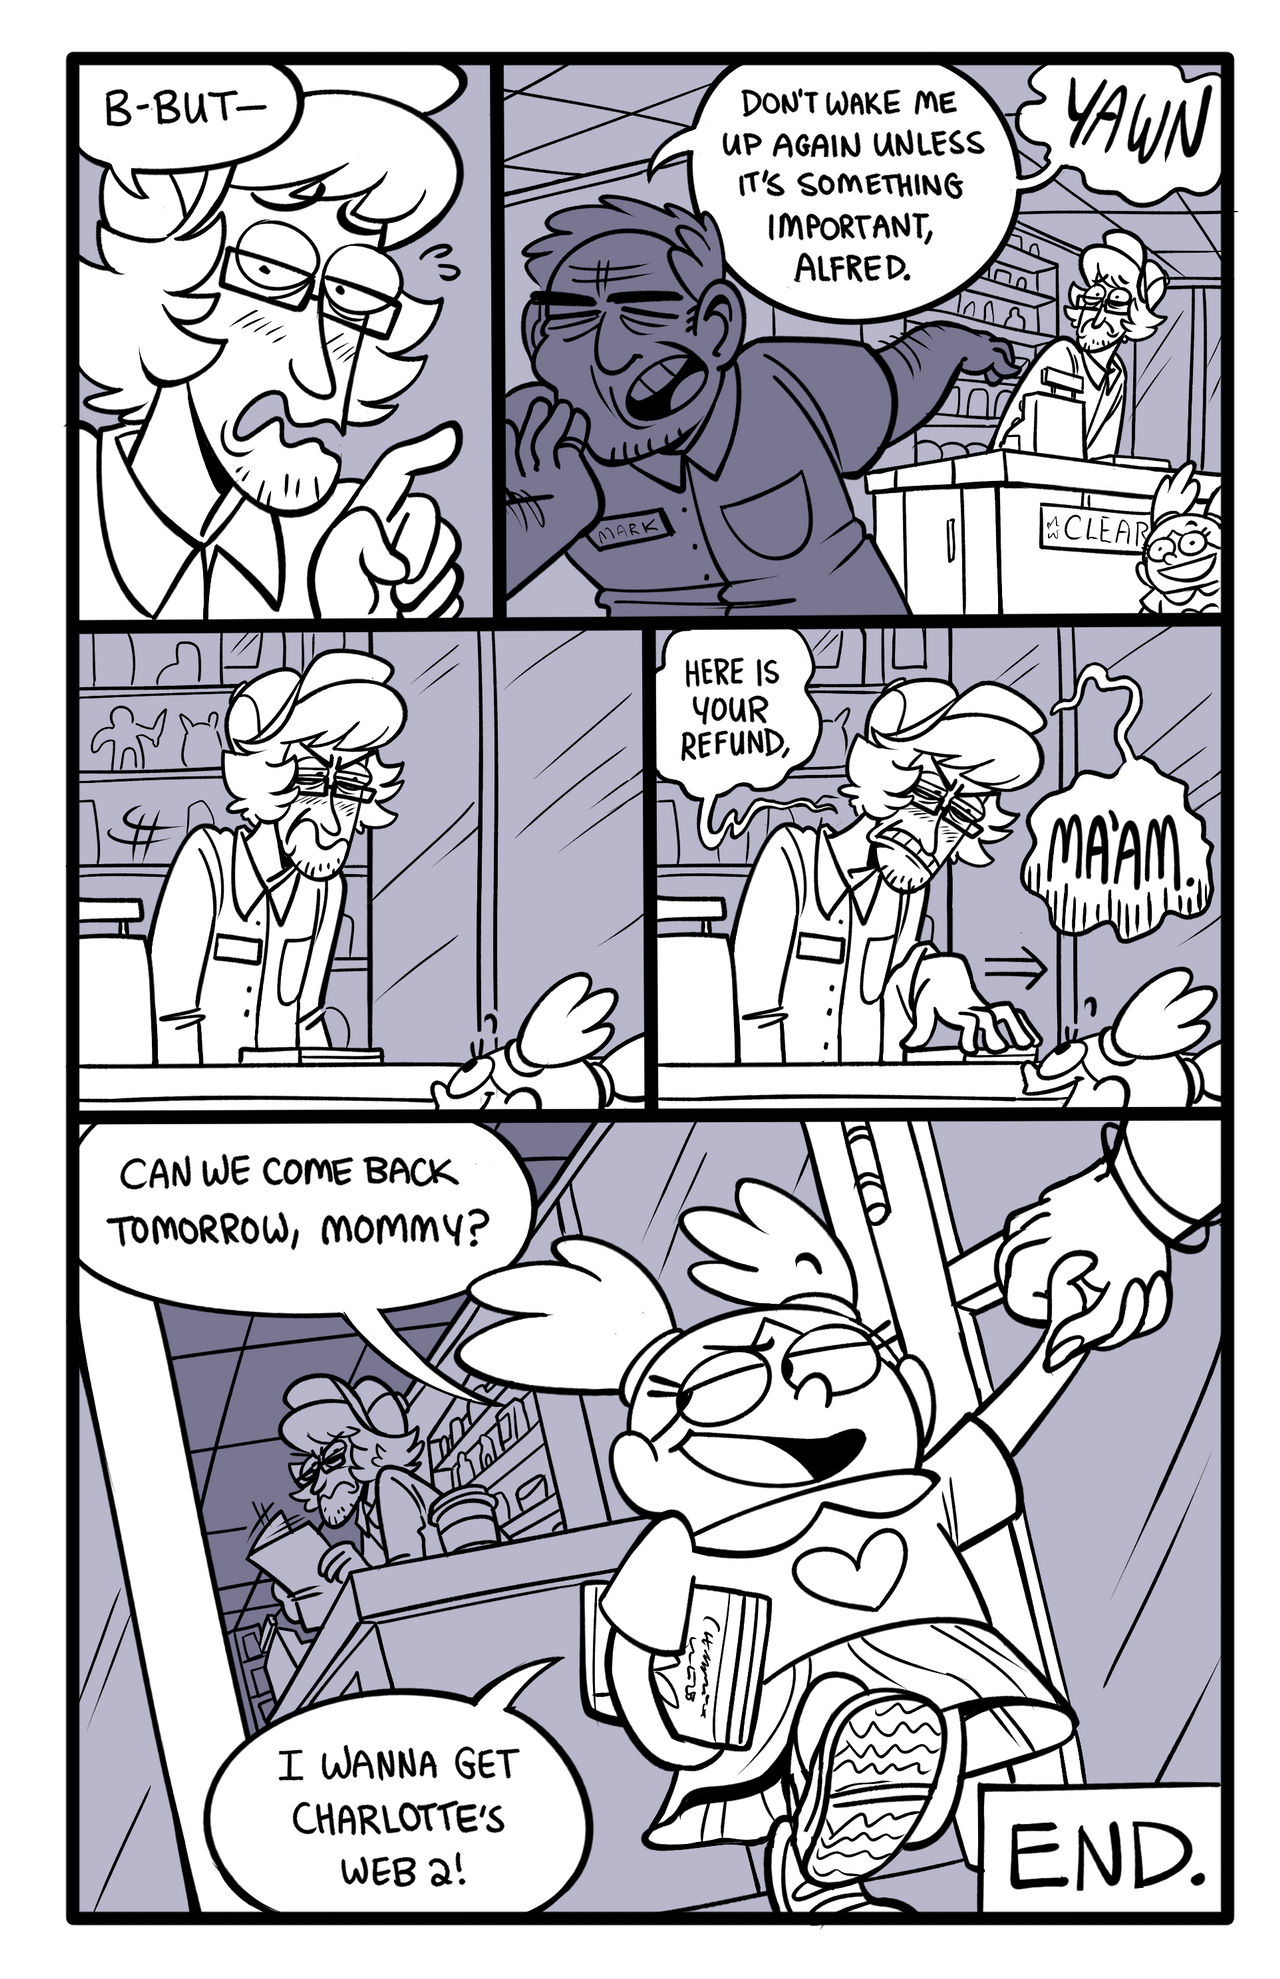 NO REFUNDS - Page 16